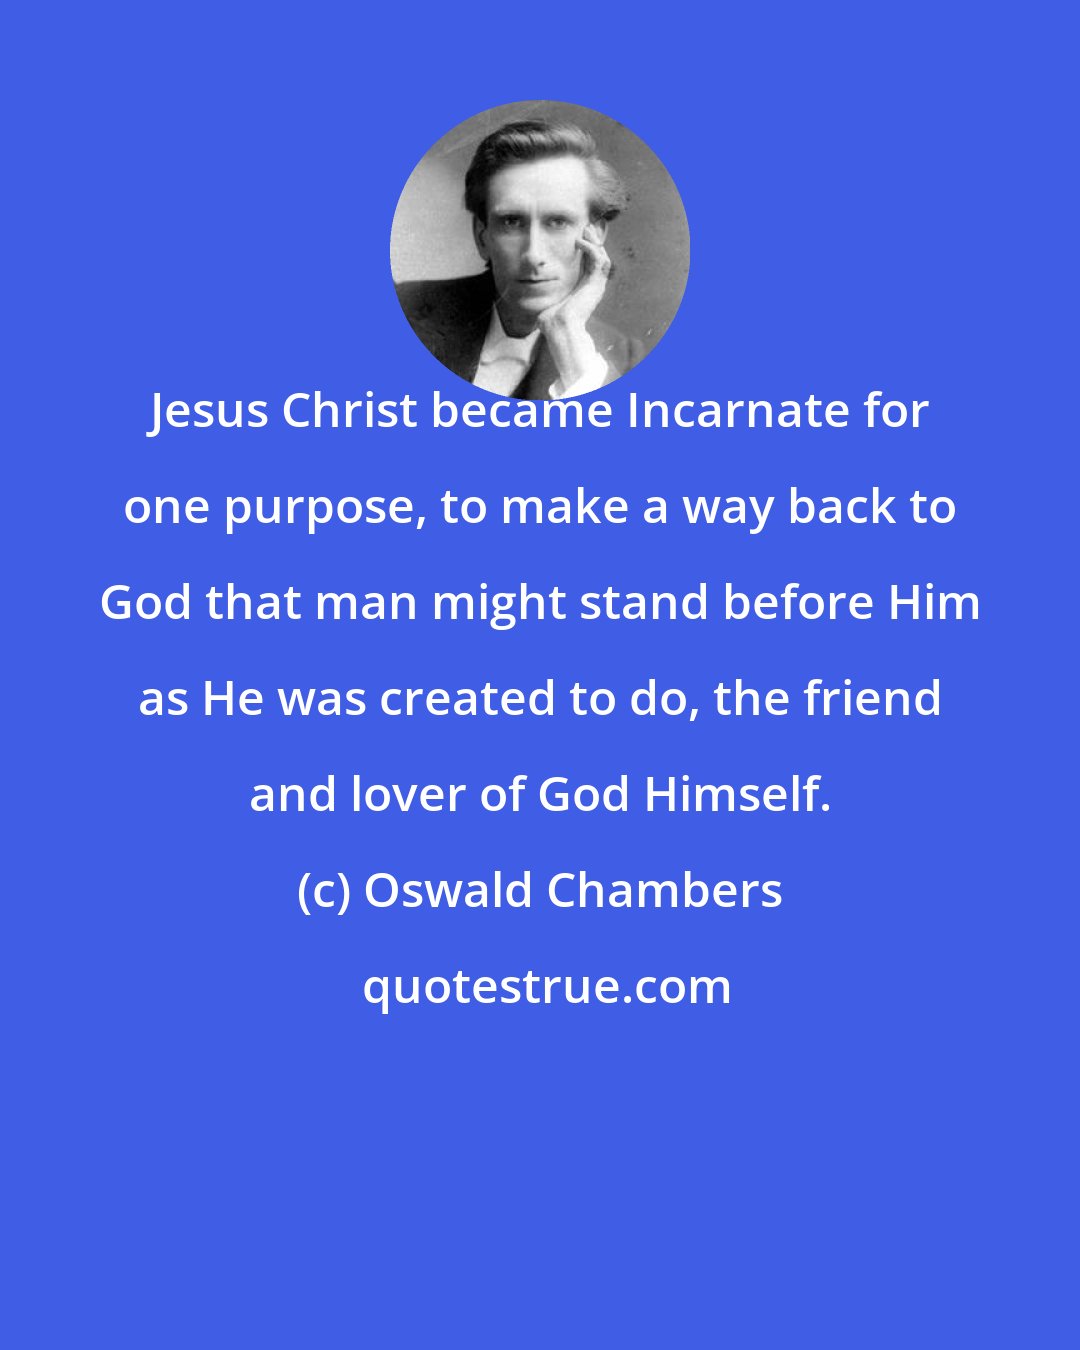 Oswald Chambers: Jesus Christ became Incarnate for one purpose, to make a way back to God that man might stand before Him as He was created to do, the friend and lover of God Himself.